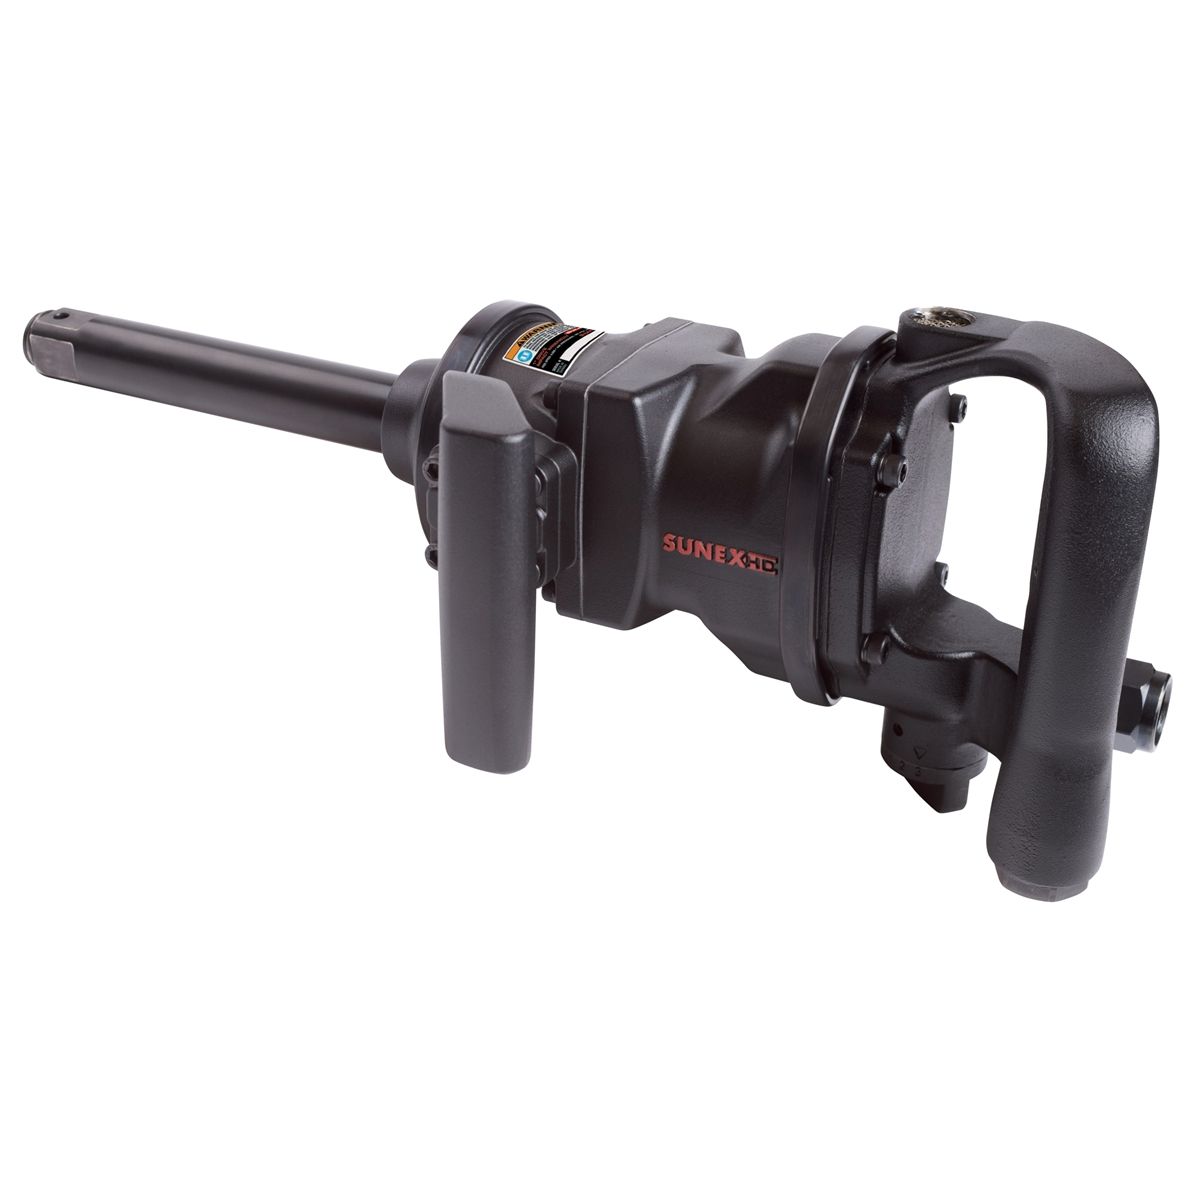 1 Inch Drive Lightweight Super Duty Impact Wrench ...